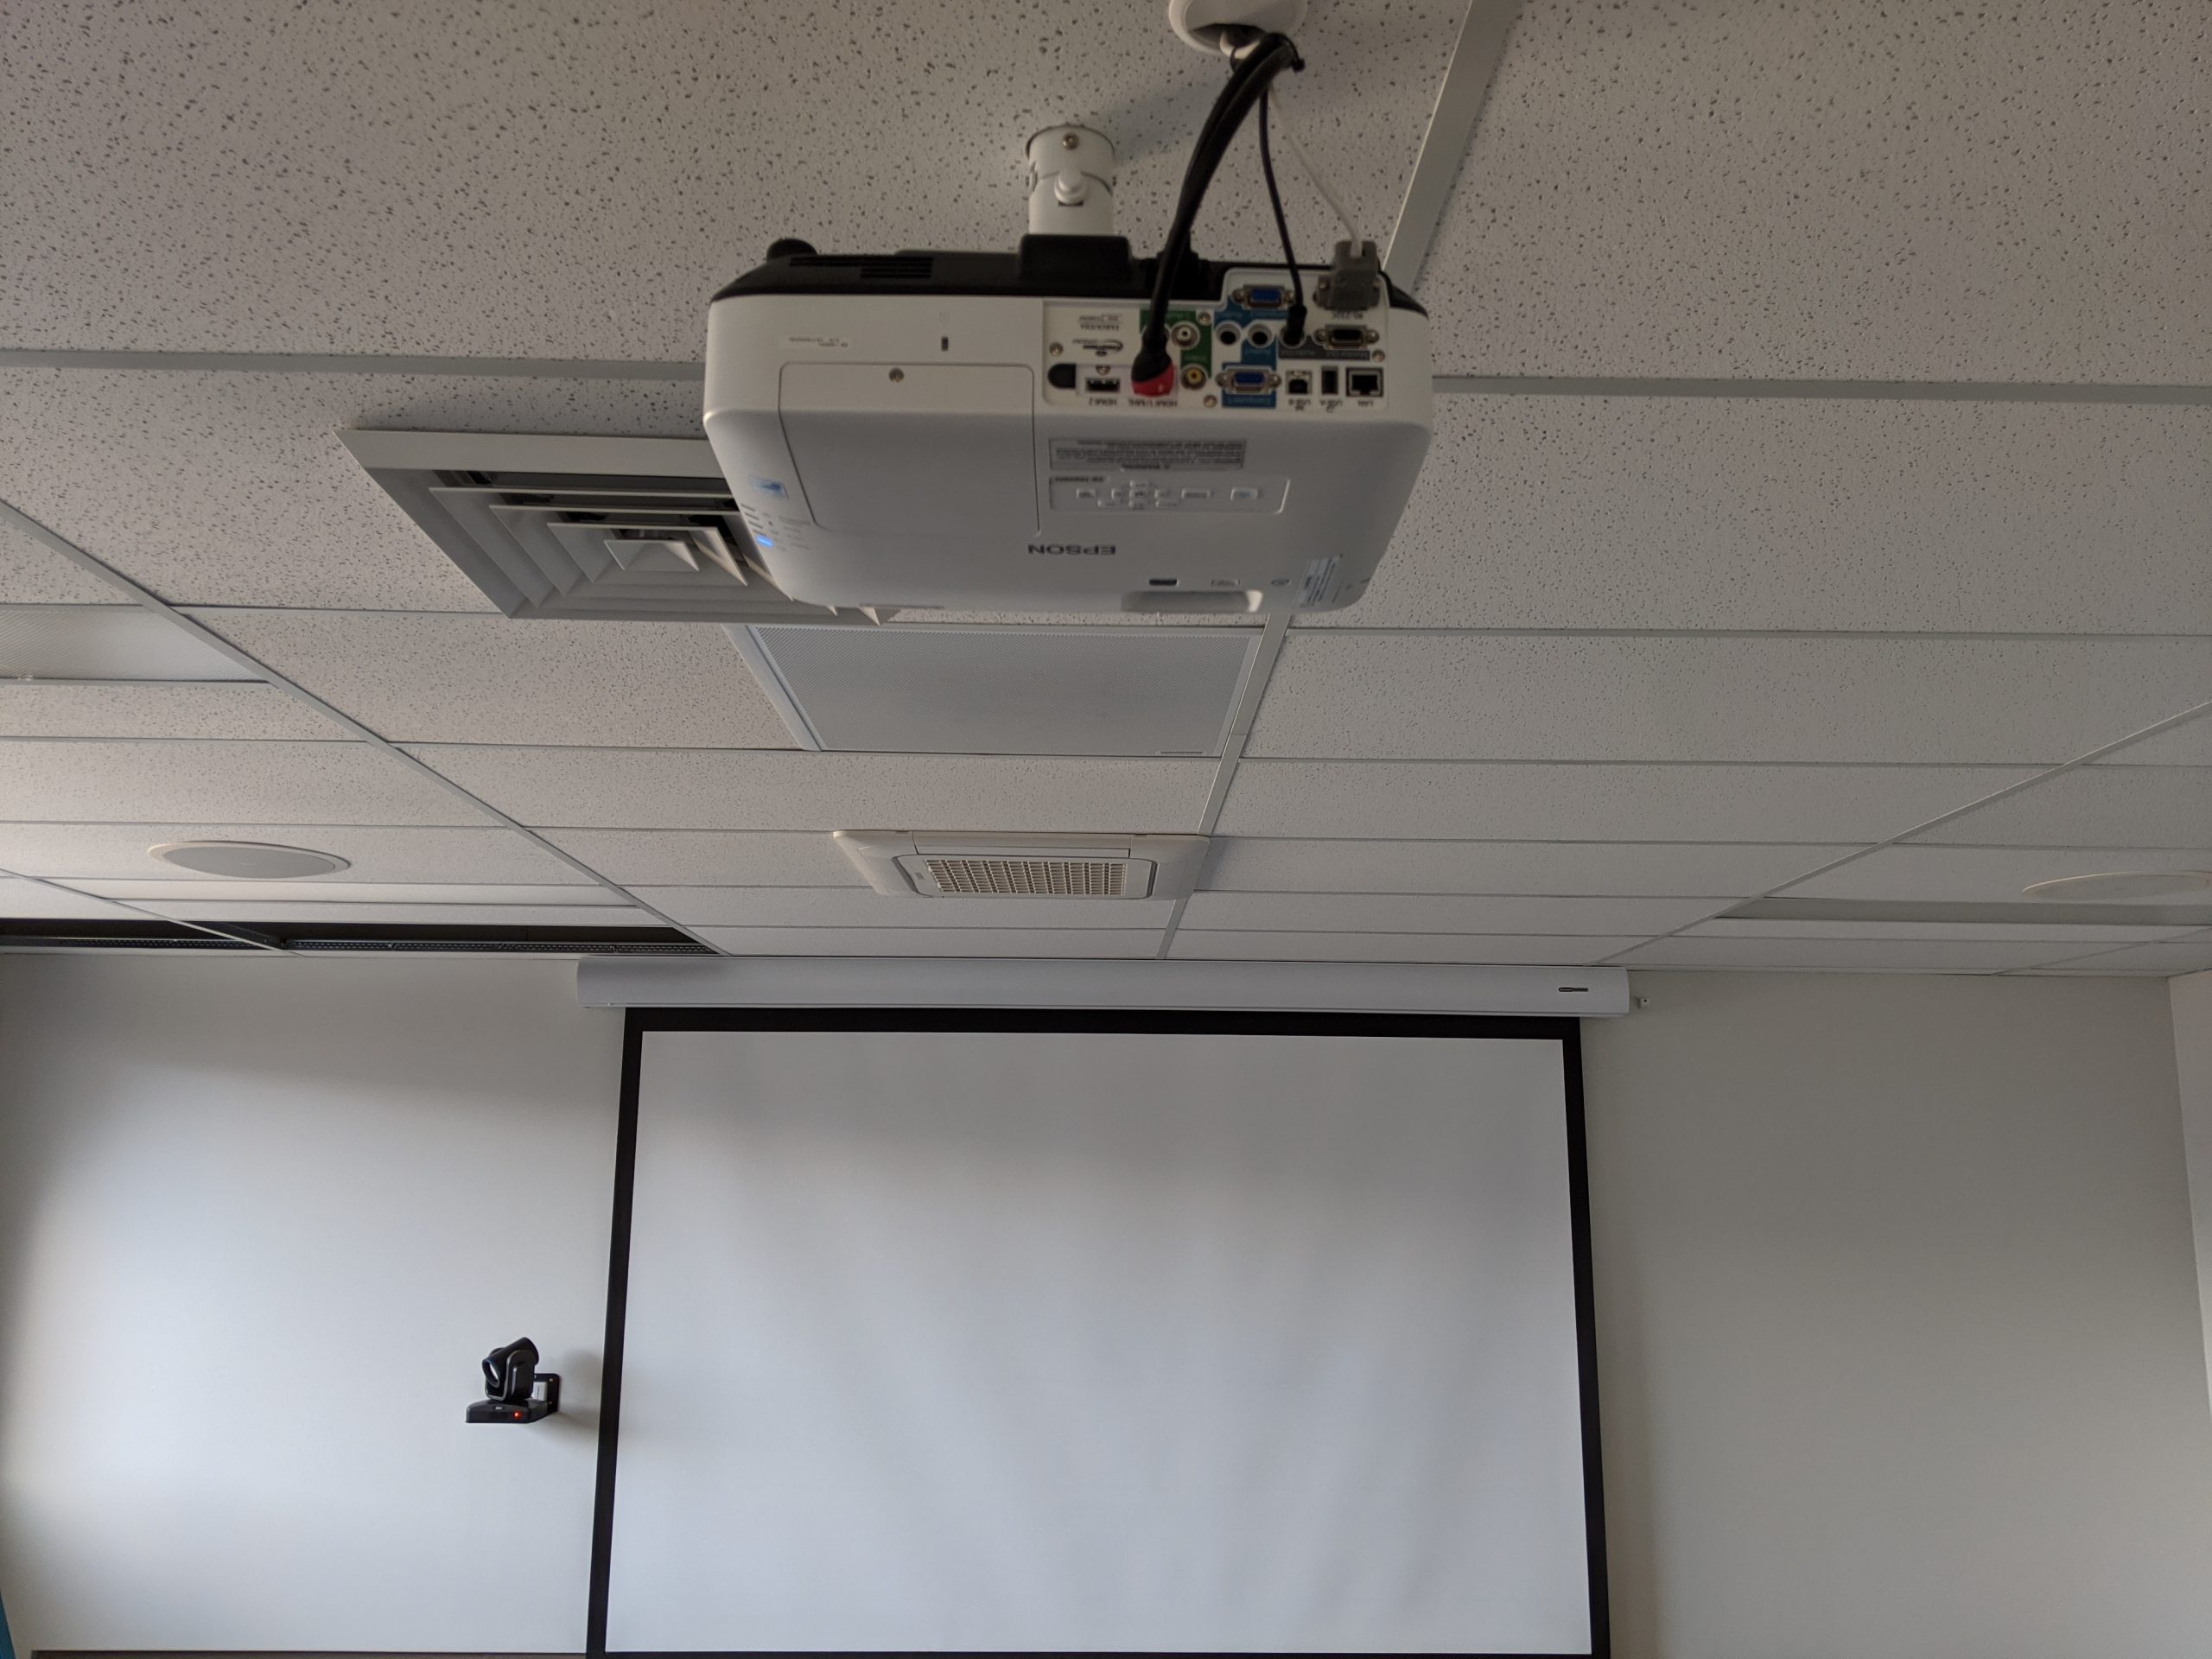 Enable Projector, Screen, Ceiling mount microphone